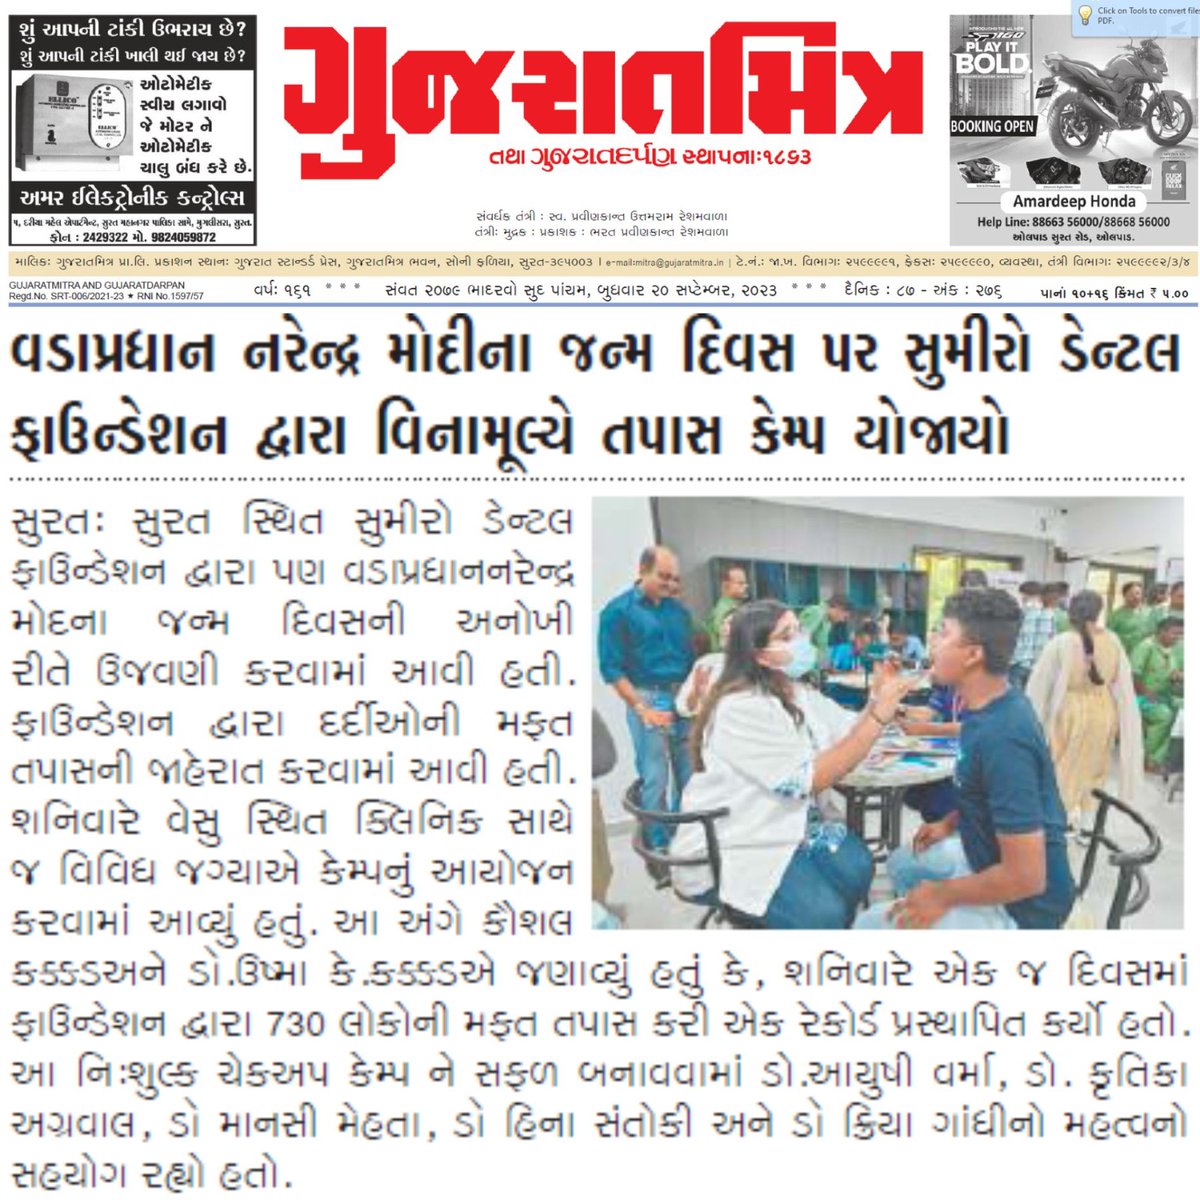 Celebrated PM Narendra Modi's 73rd Birthday Featured in top newspapers like Gujaratmitra, LOKTEJ, The Blunt Times, and Rajasthan Patrika! Honuored & thrilled by the #coverage. Summirow Foundation is committed to providing essential dental care solutions to society.

#dentalcare